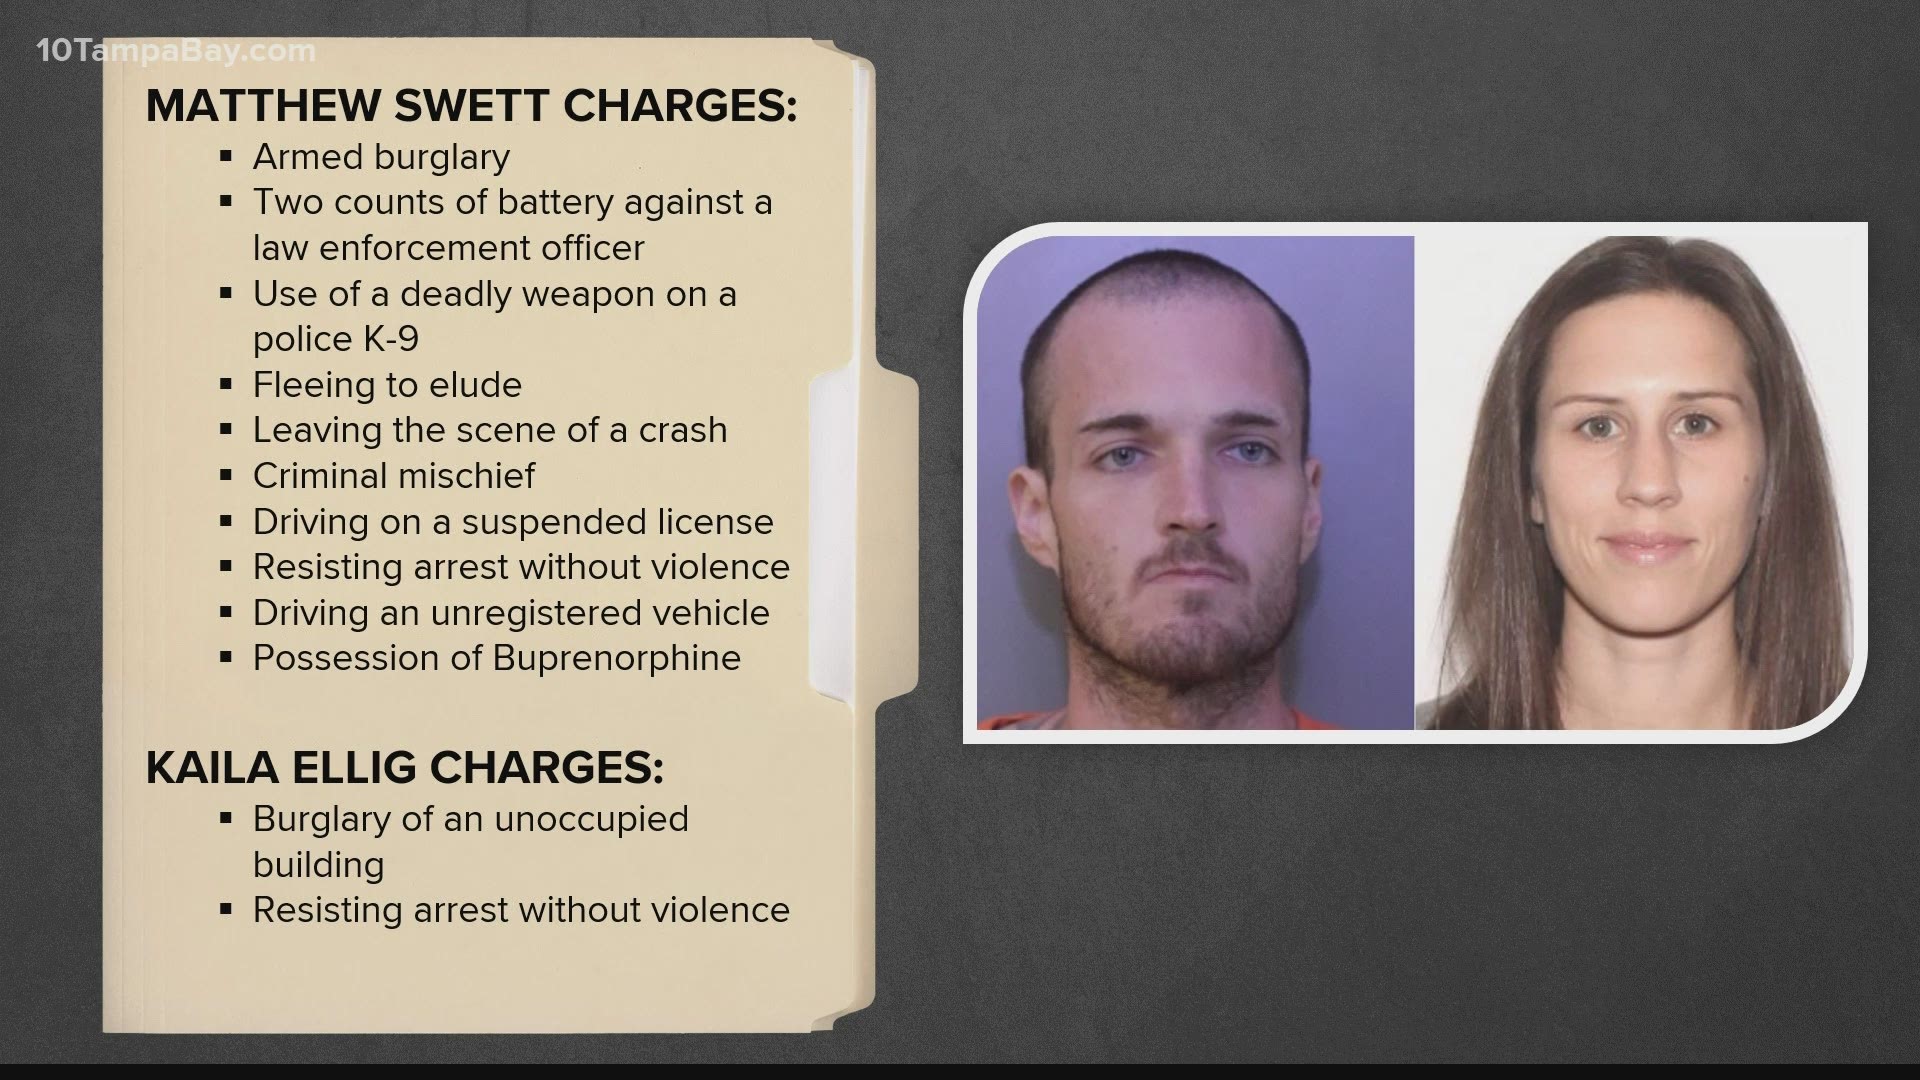 The man and woman are facing several charges.